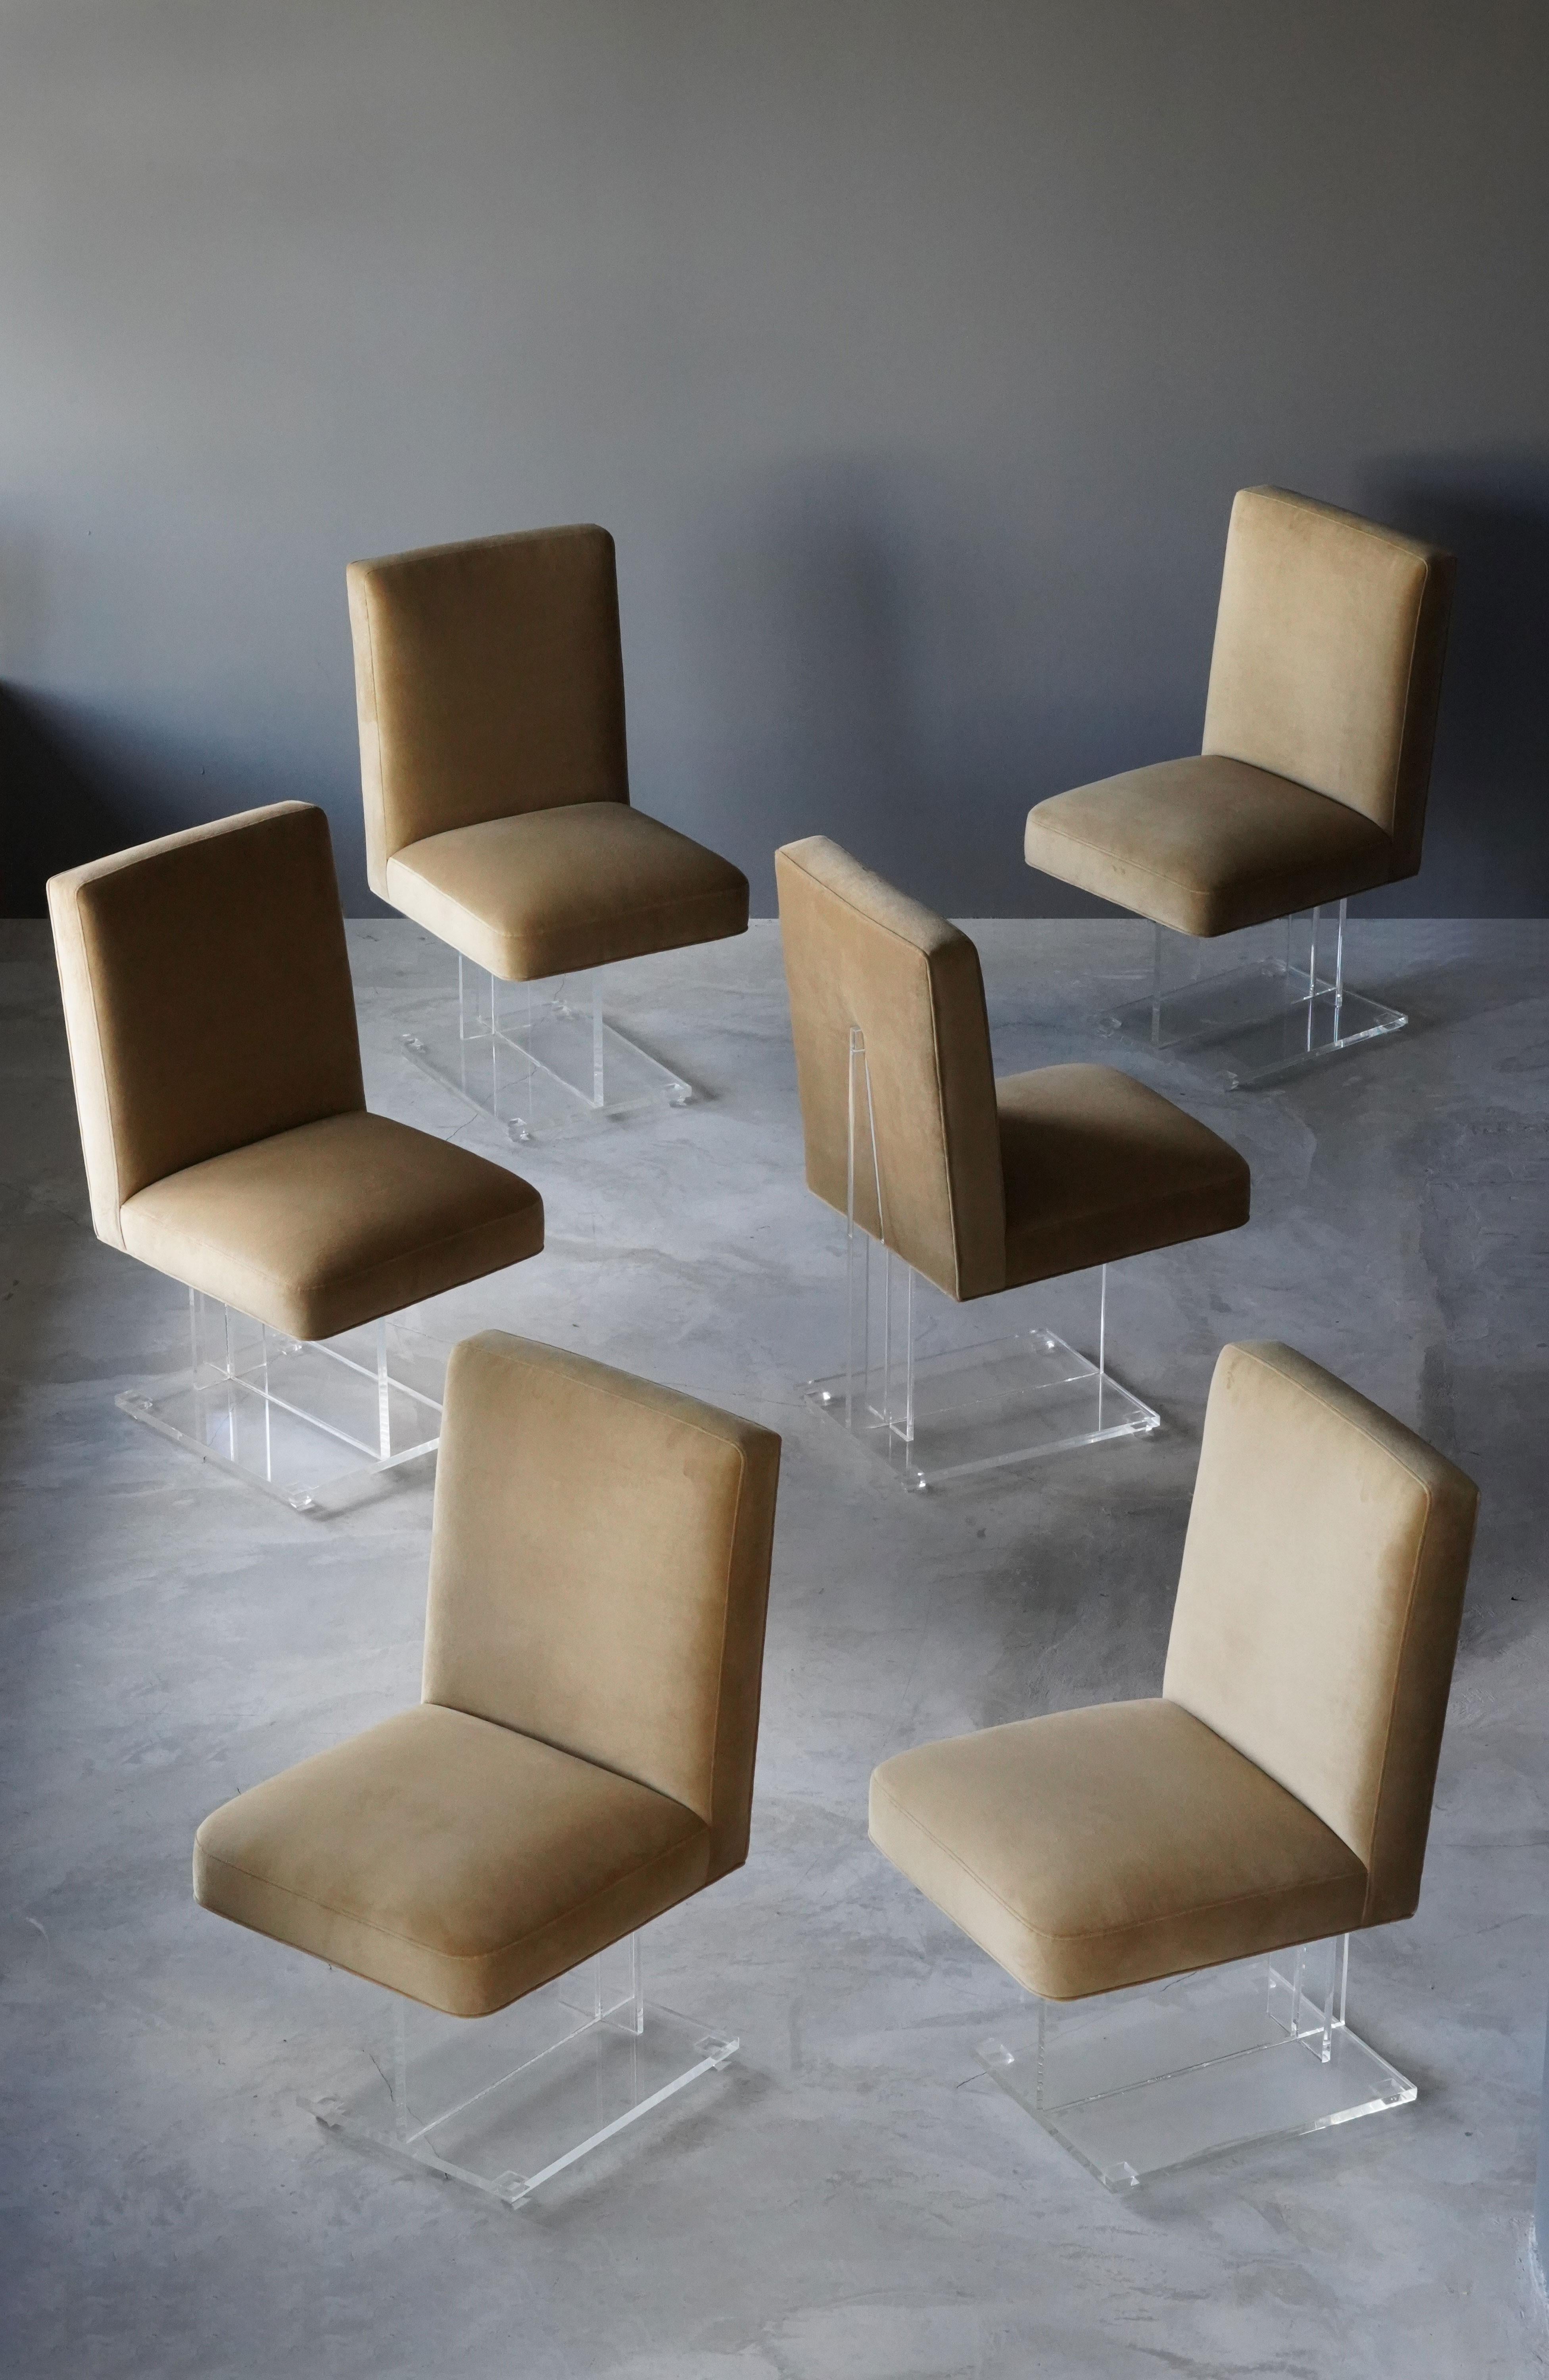 A set if 6 dining / side chairs, model 6726 designed by Vladimir Kagan, circa 1970s. The overstuffed seats rests on one-legged Lucite bases. 

Other designers of the period include Karl Springer, Paul Evans, Charles Hollis Jones, Edward Wormley,